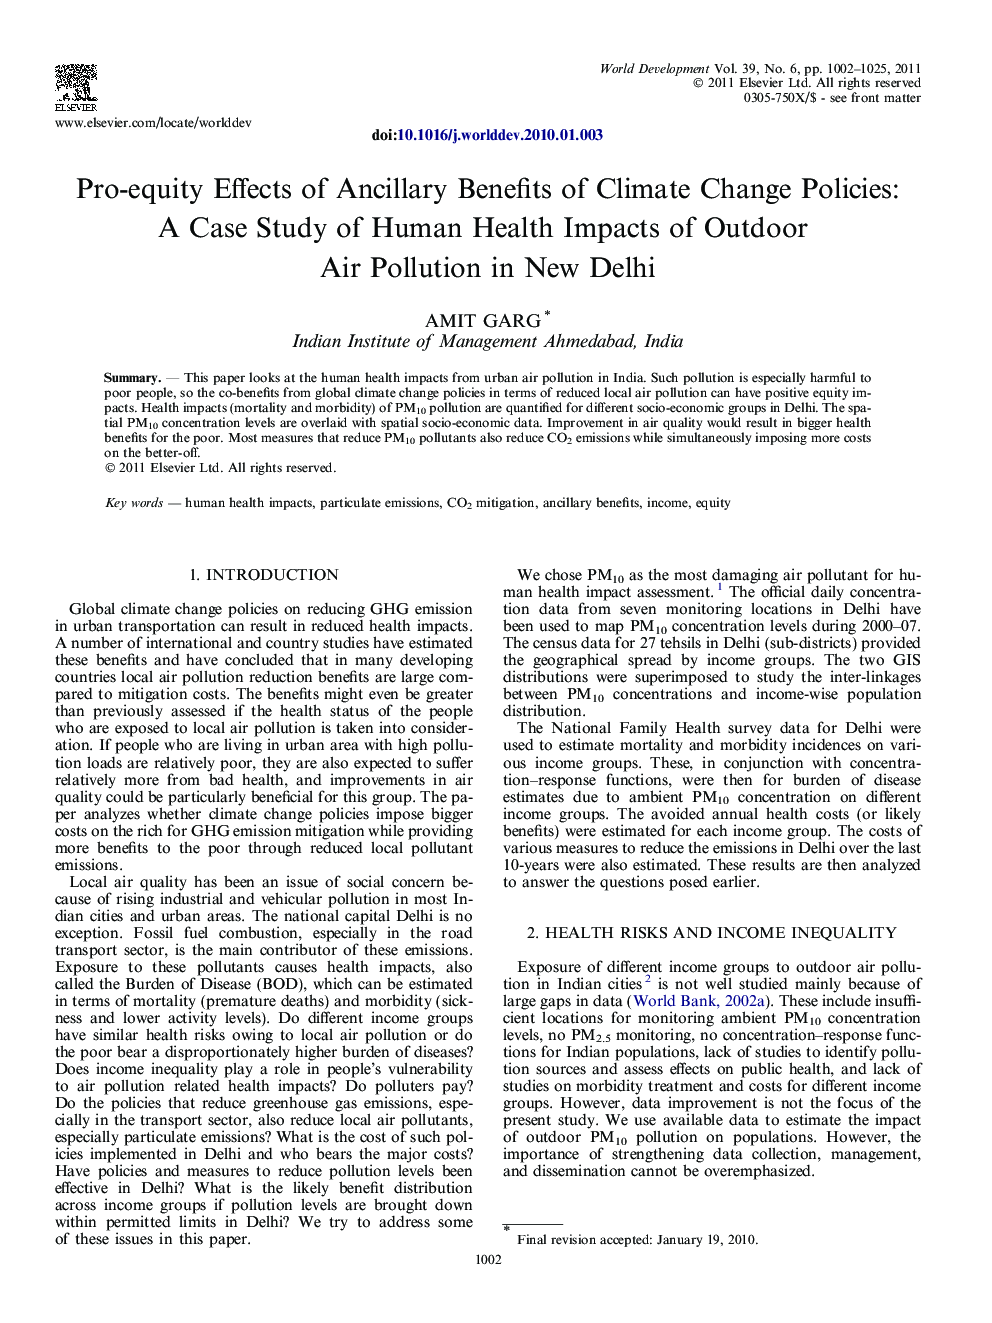 Pro-equity Effects of Ancillary Benefits of Climate Change Policies: A Case Study of Human Health Impacts of Outdoor Air Pollution in New Delhi